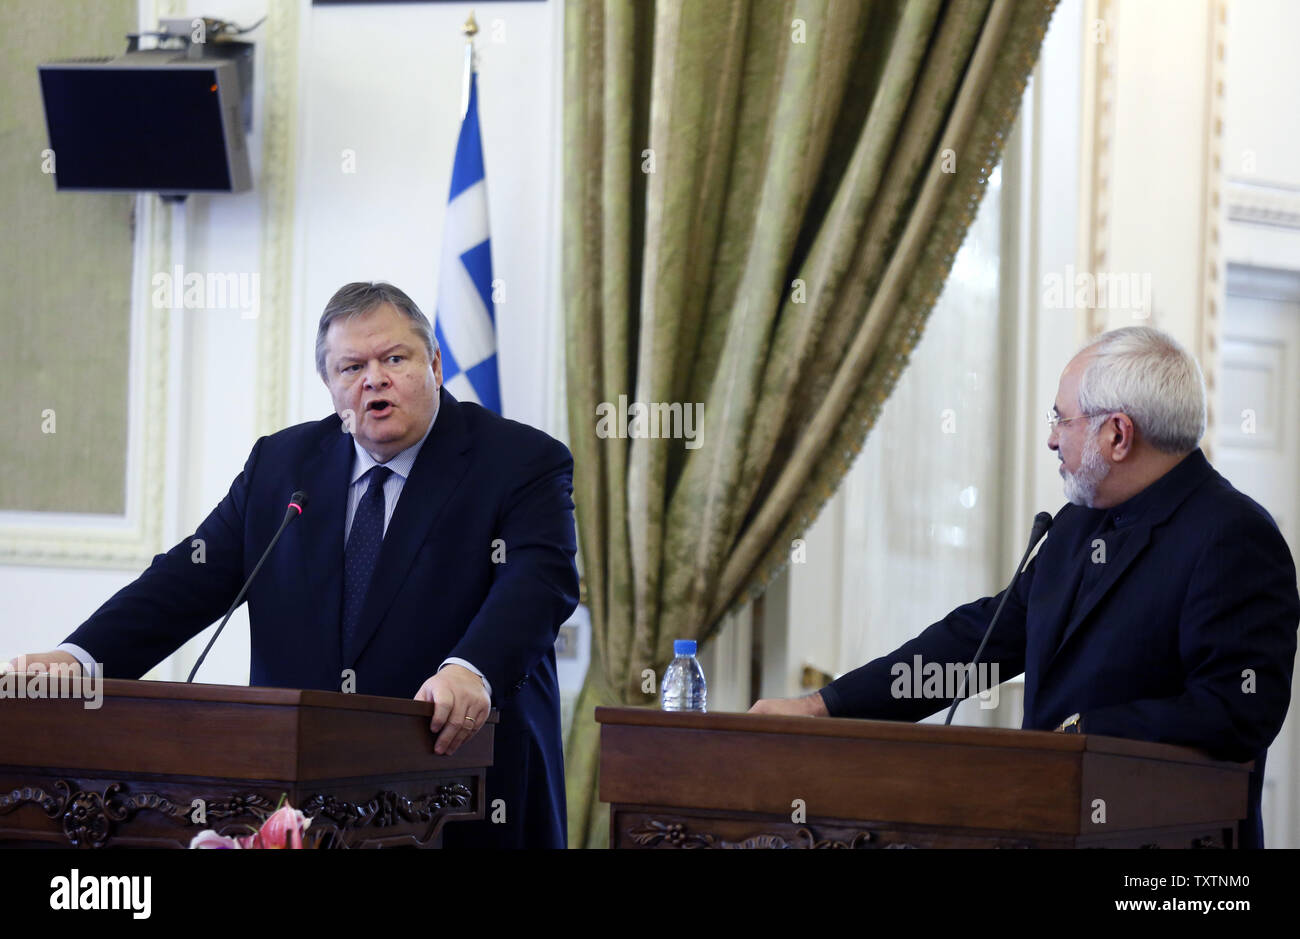 Evangelos Venizelos, Greek foreign minister (L) speaks as Iranian FM Mohammad Javad Zarif (R) looks on during their joint press conference at Iranian Foreign ministry in Tehran, Iran on March 15, 2014. Venizelos is also scheduled to hold talks with other Iranian officials to discuss ways of expansion of bilateral ties between Athens and Tehran.     UPI/Maryam Rahmanian Stock Photo